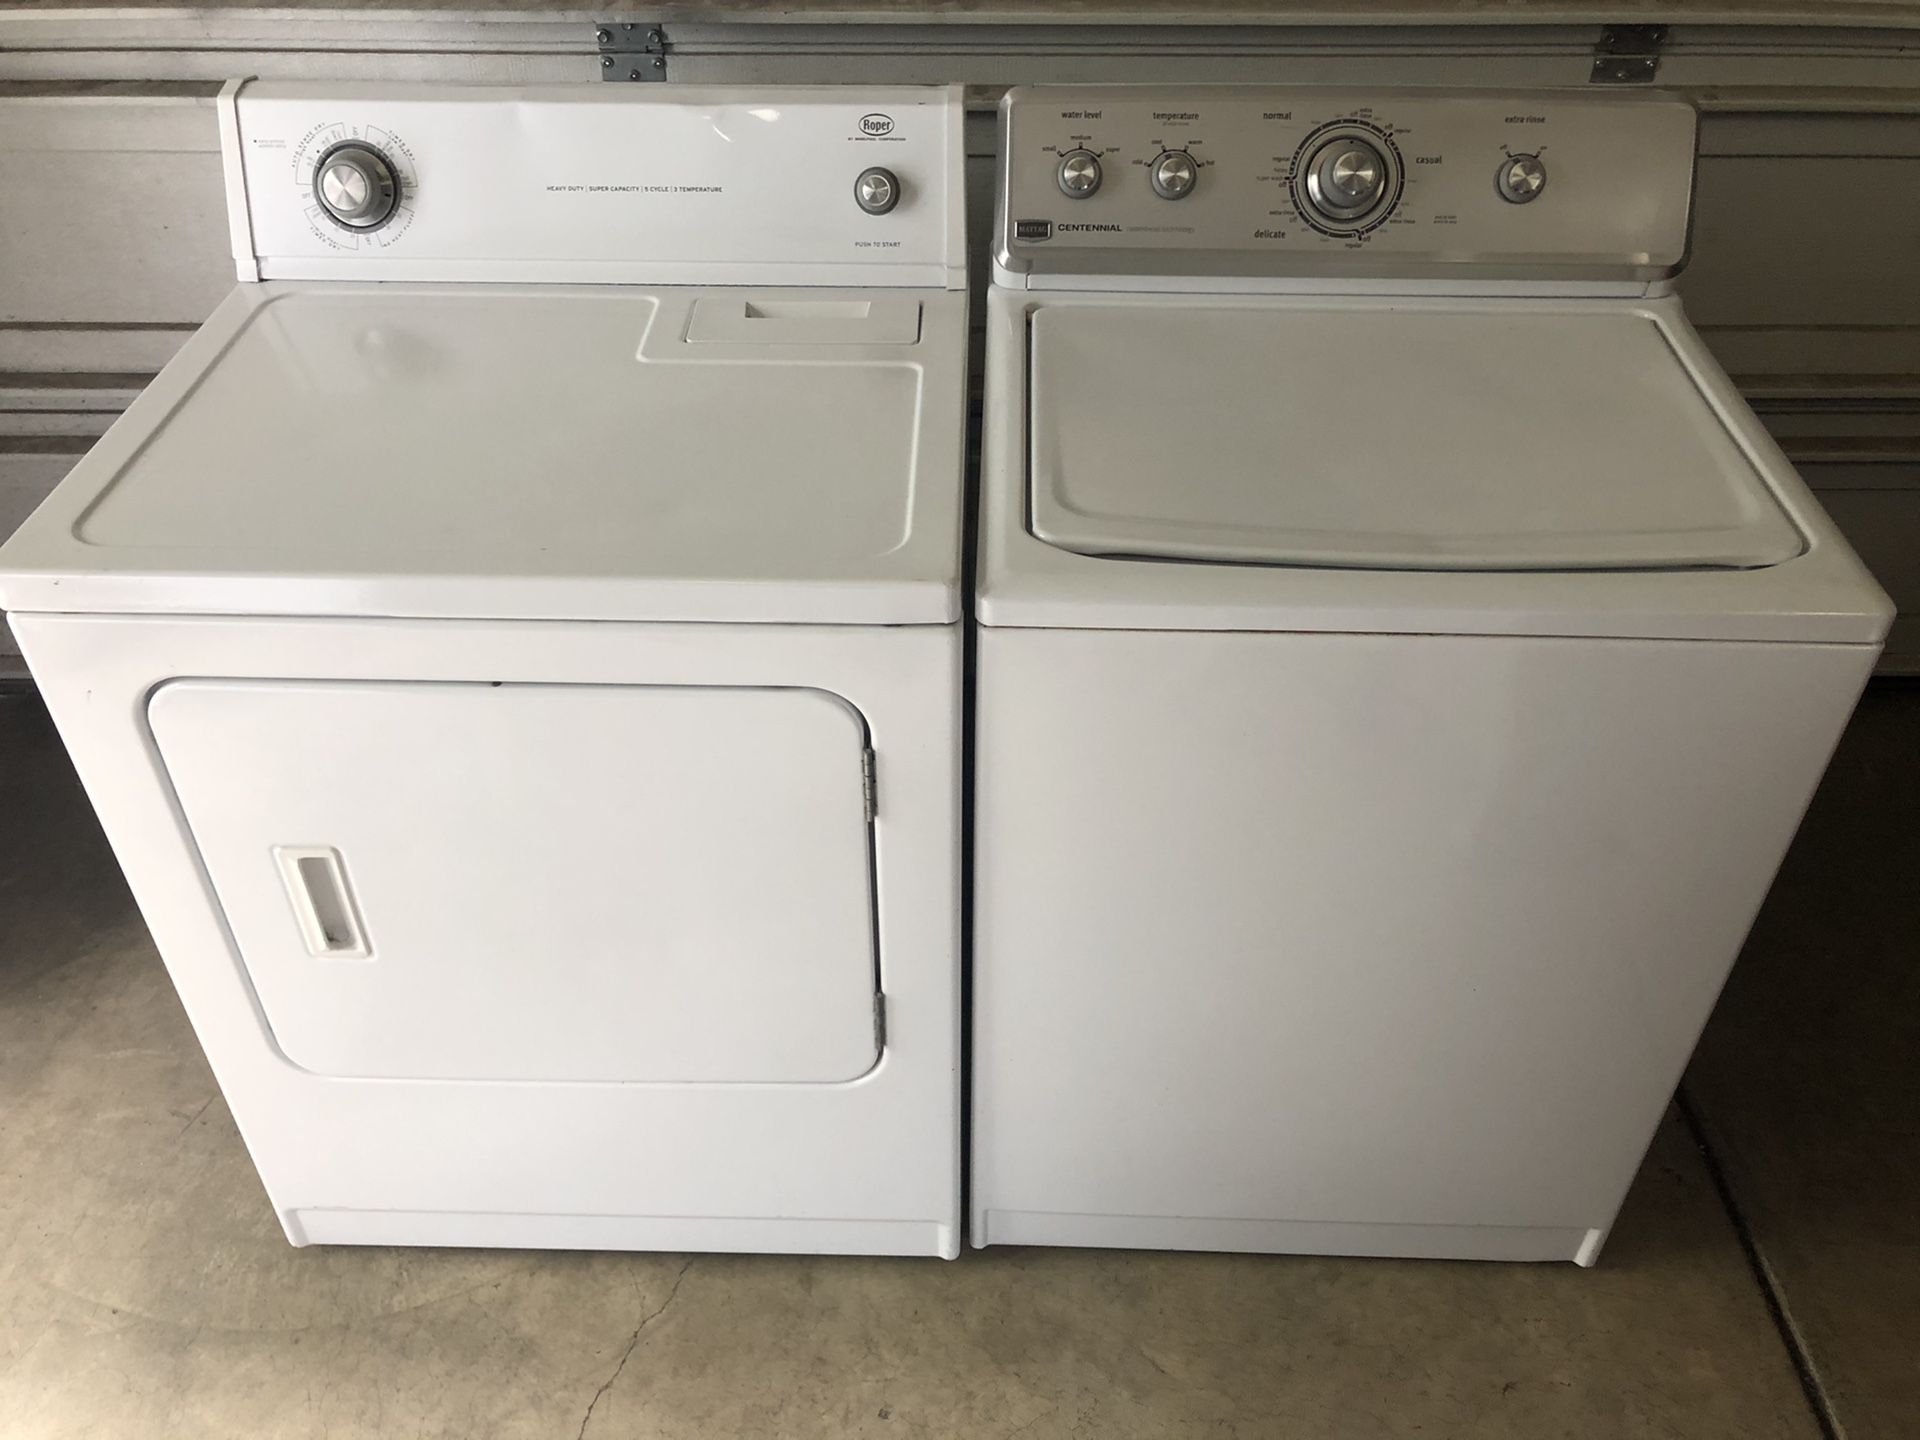 Great working washer and dryer